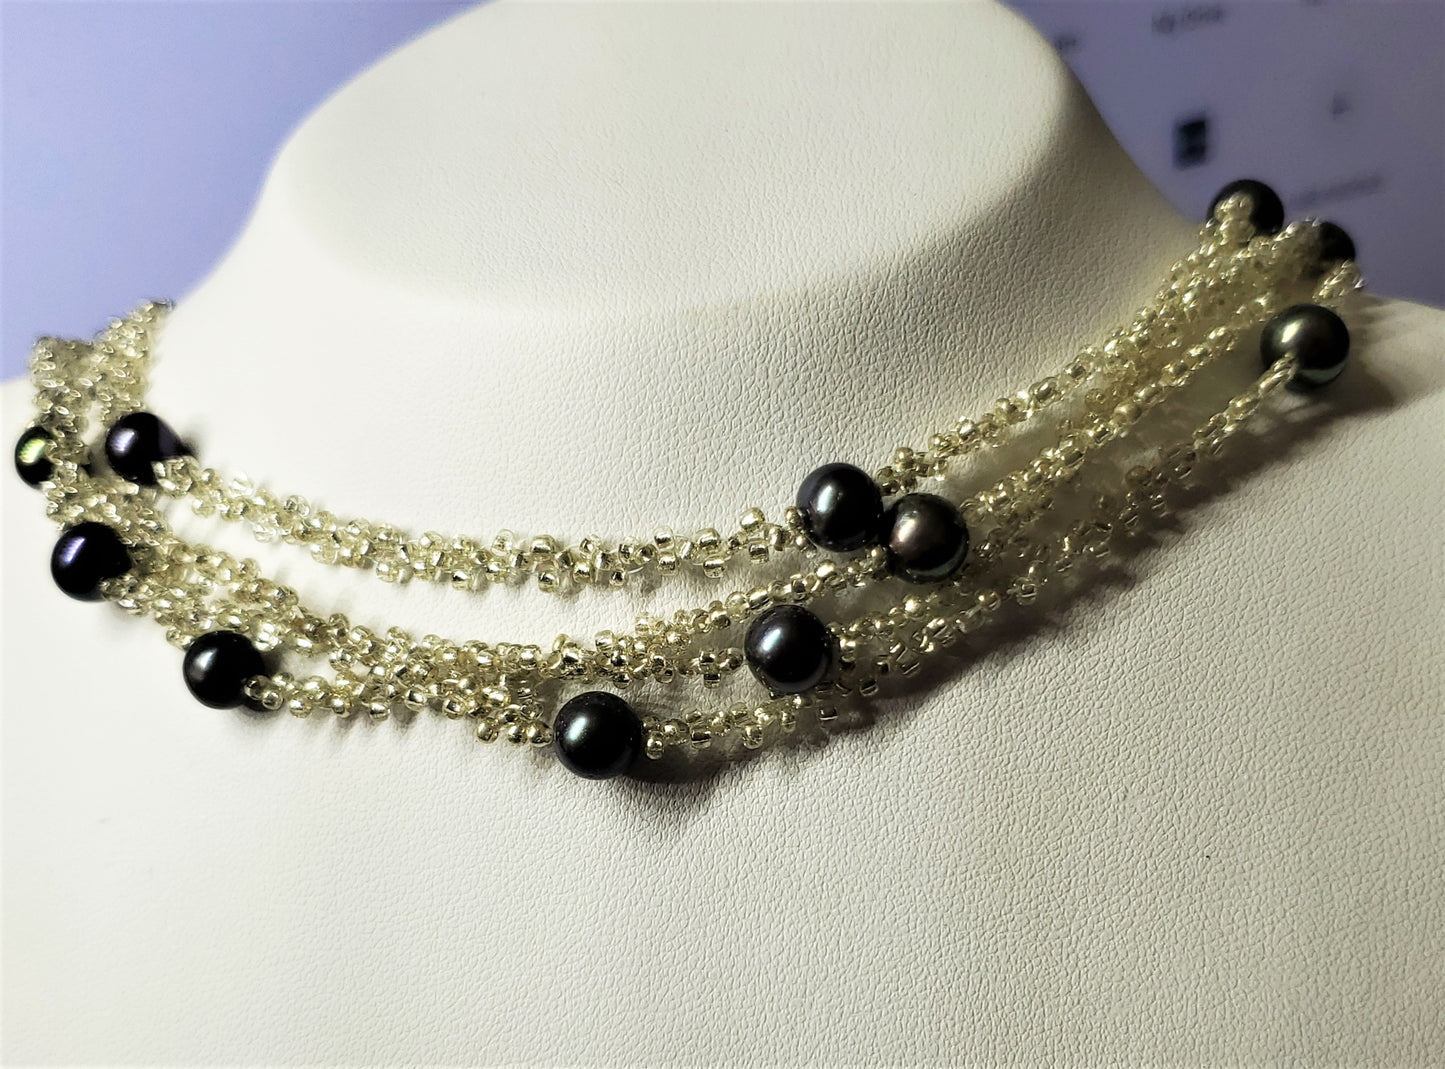 Handmade Silver Beaded Pacific Black Pearl Wrap Around Necklace